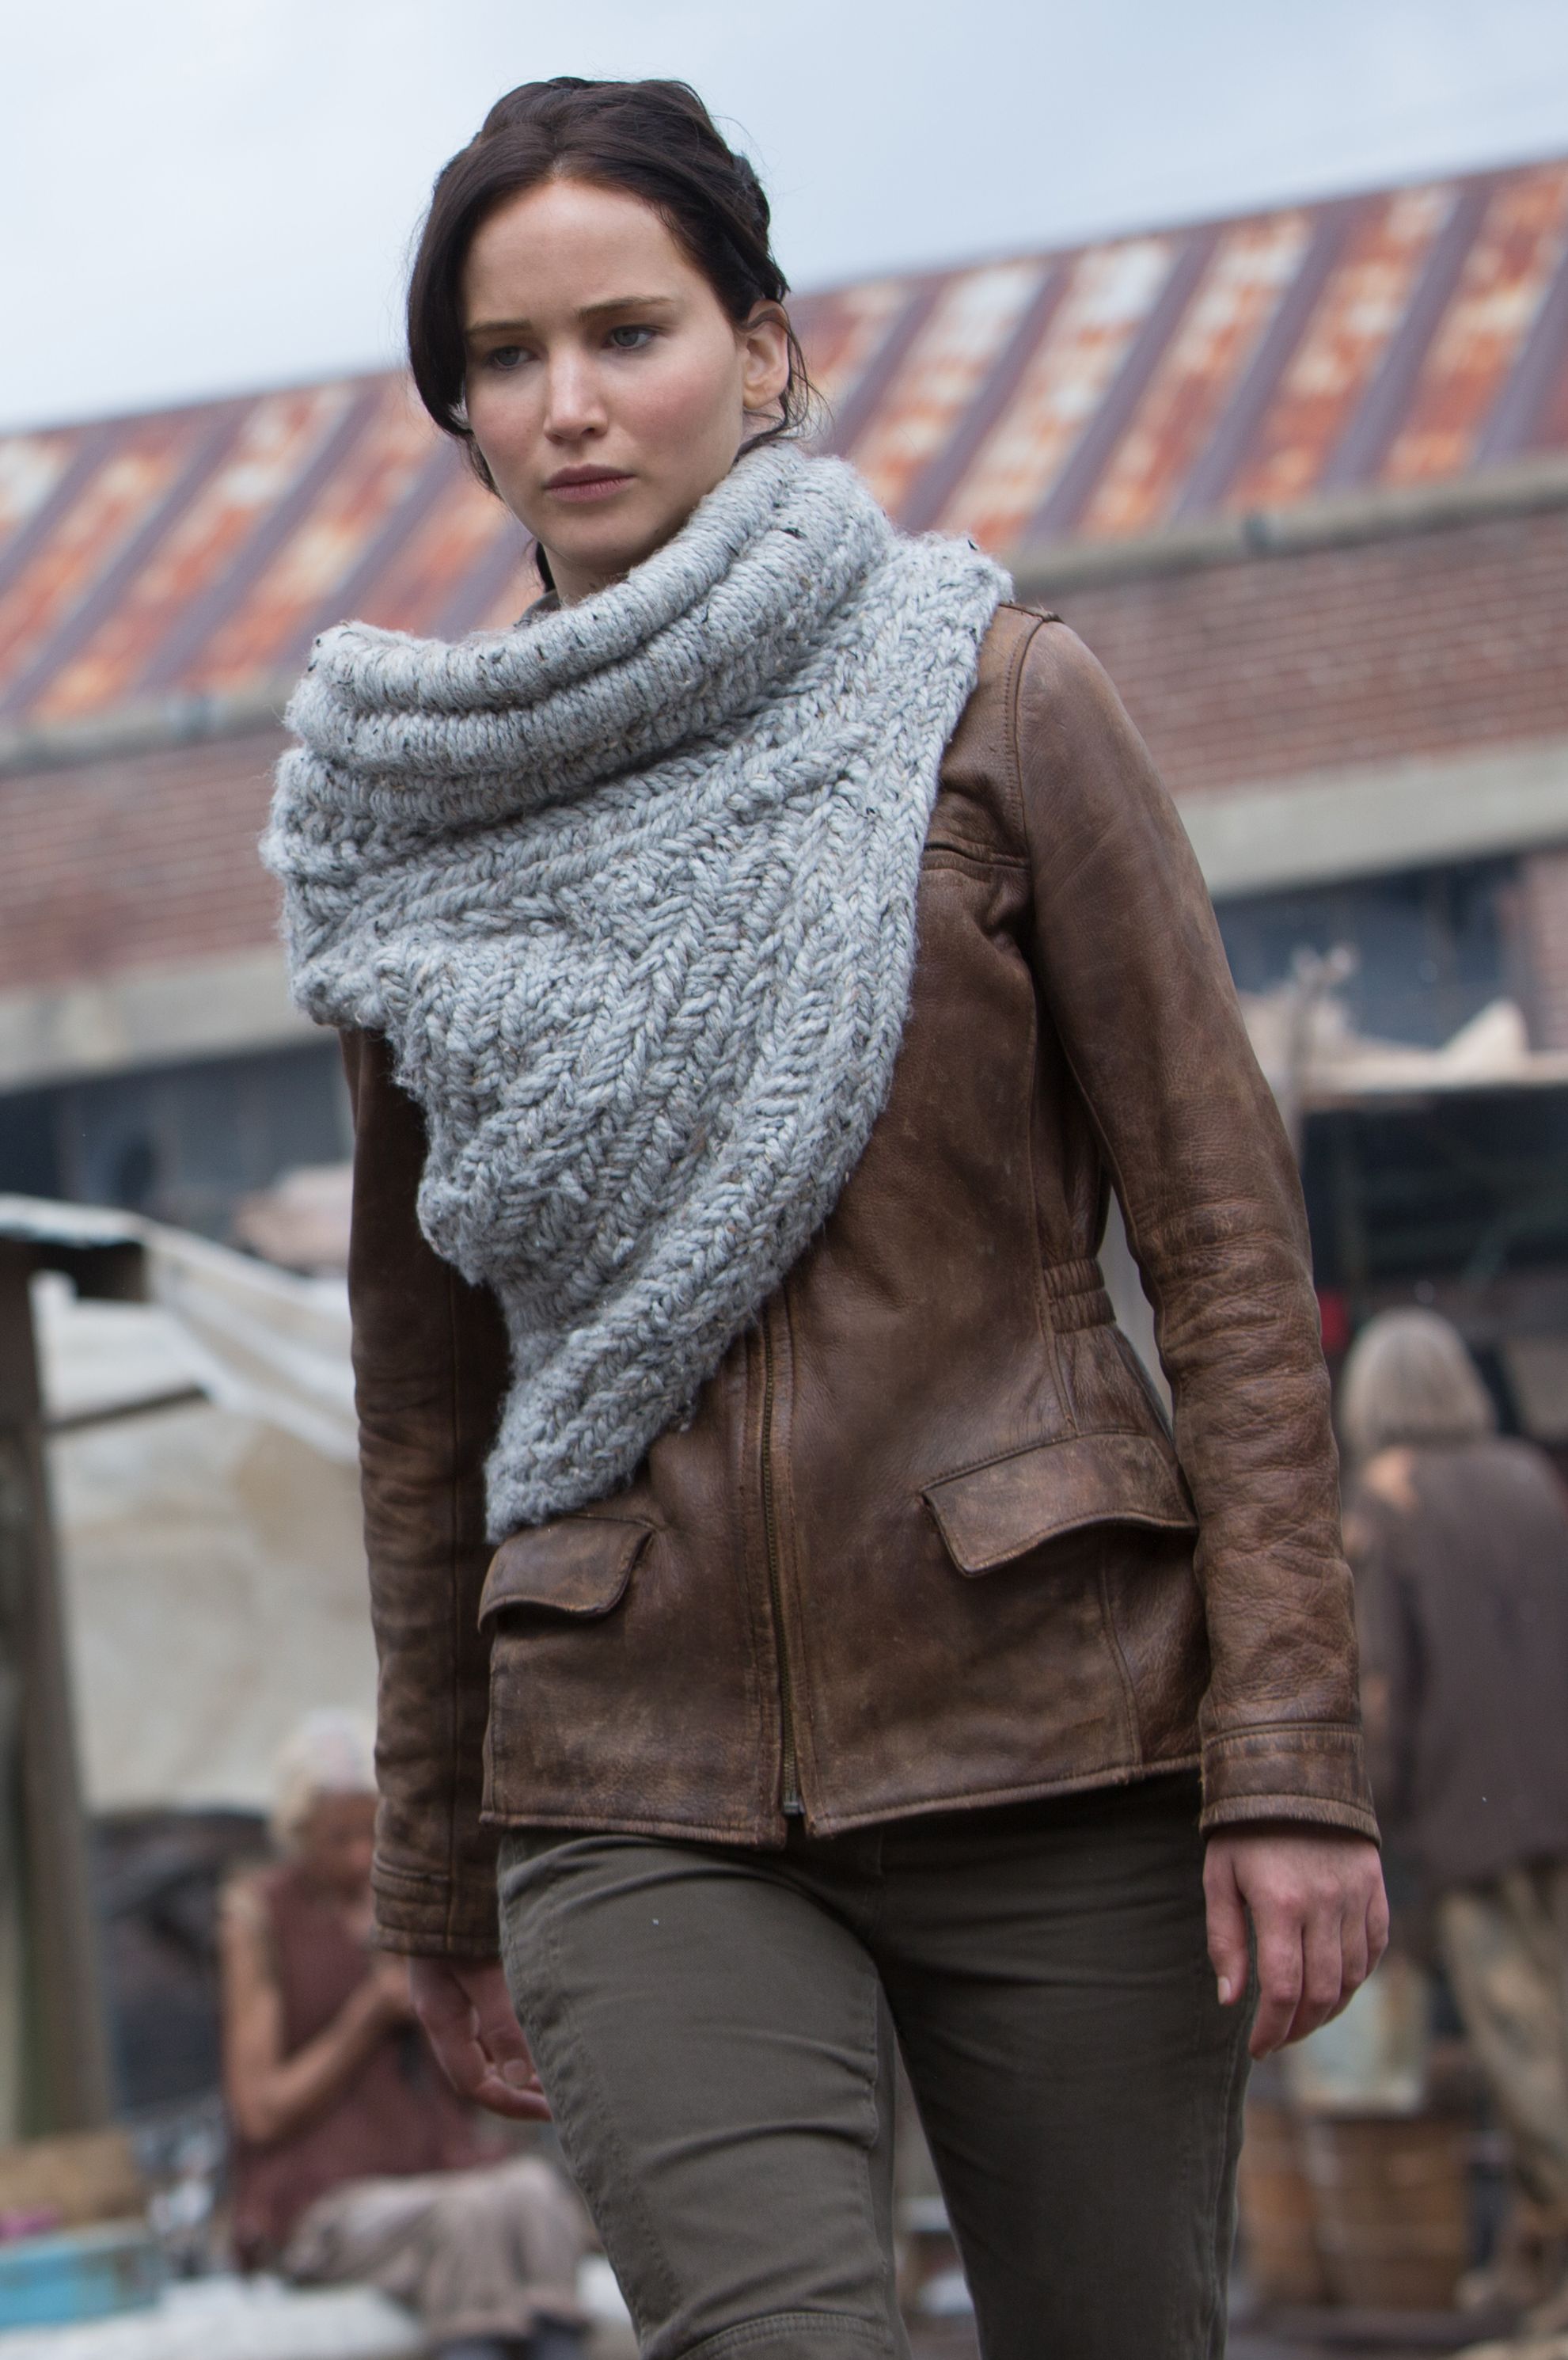 Fancy scarf in Hunger Games: Catching Fire